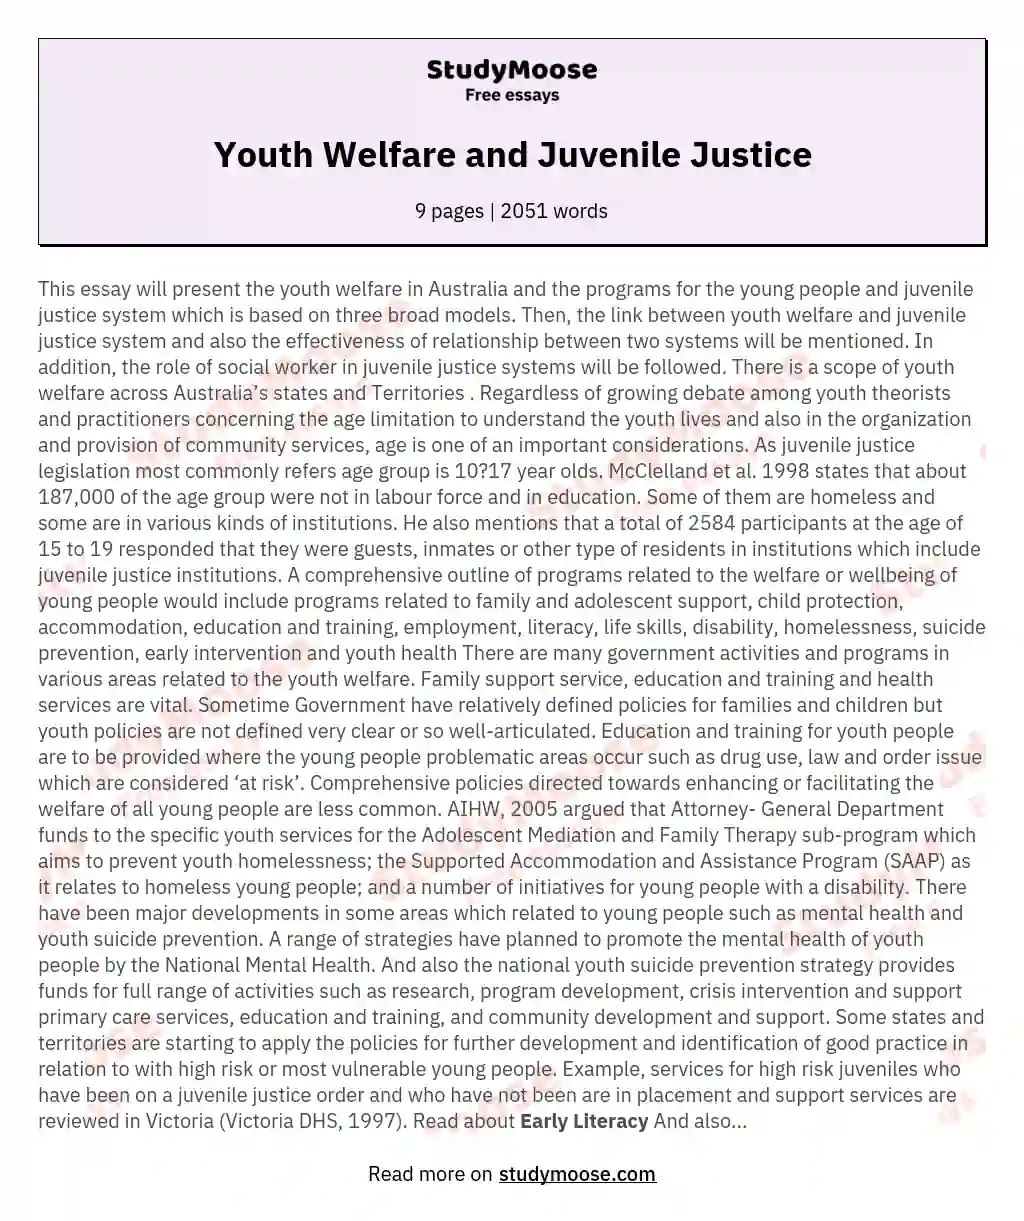 Youth Welfare and Juvenile Justice essay